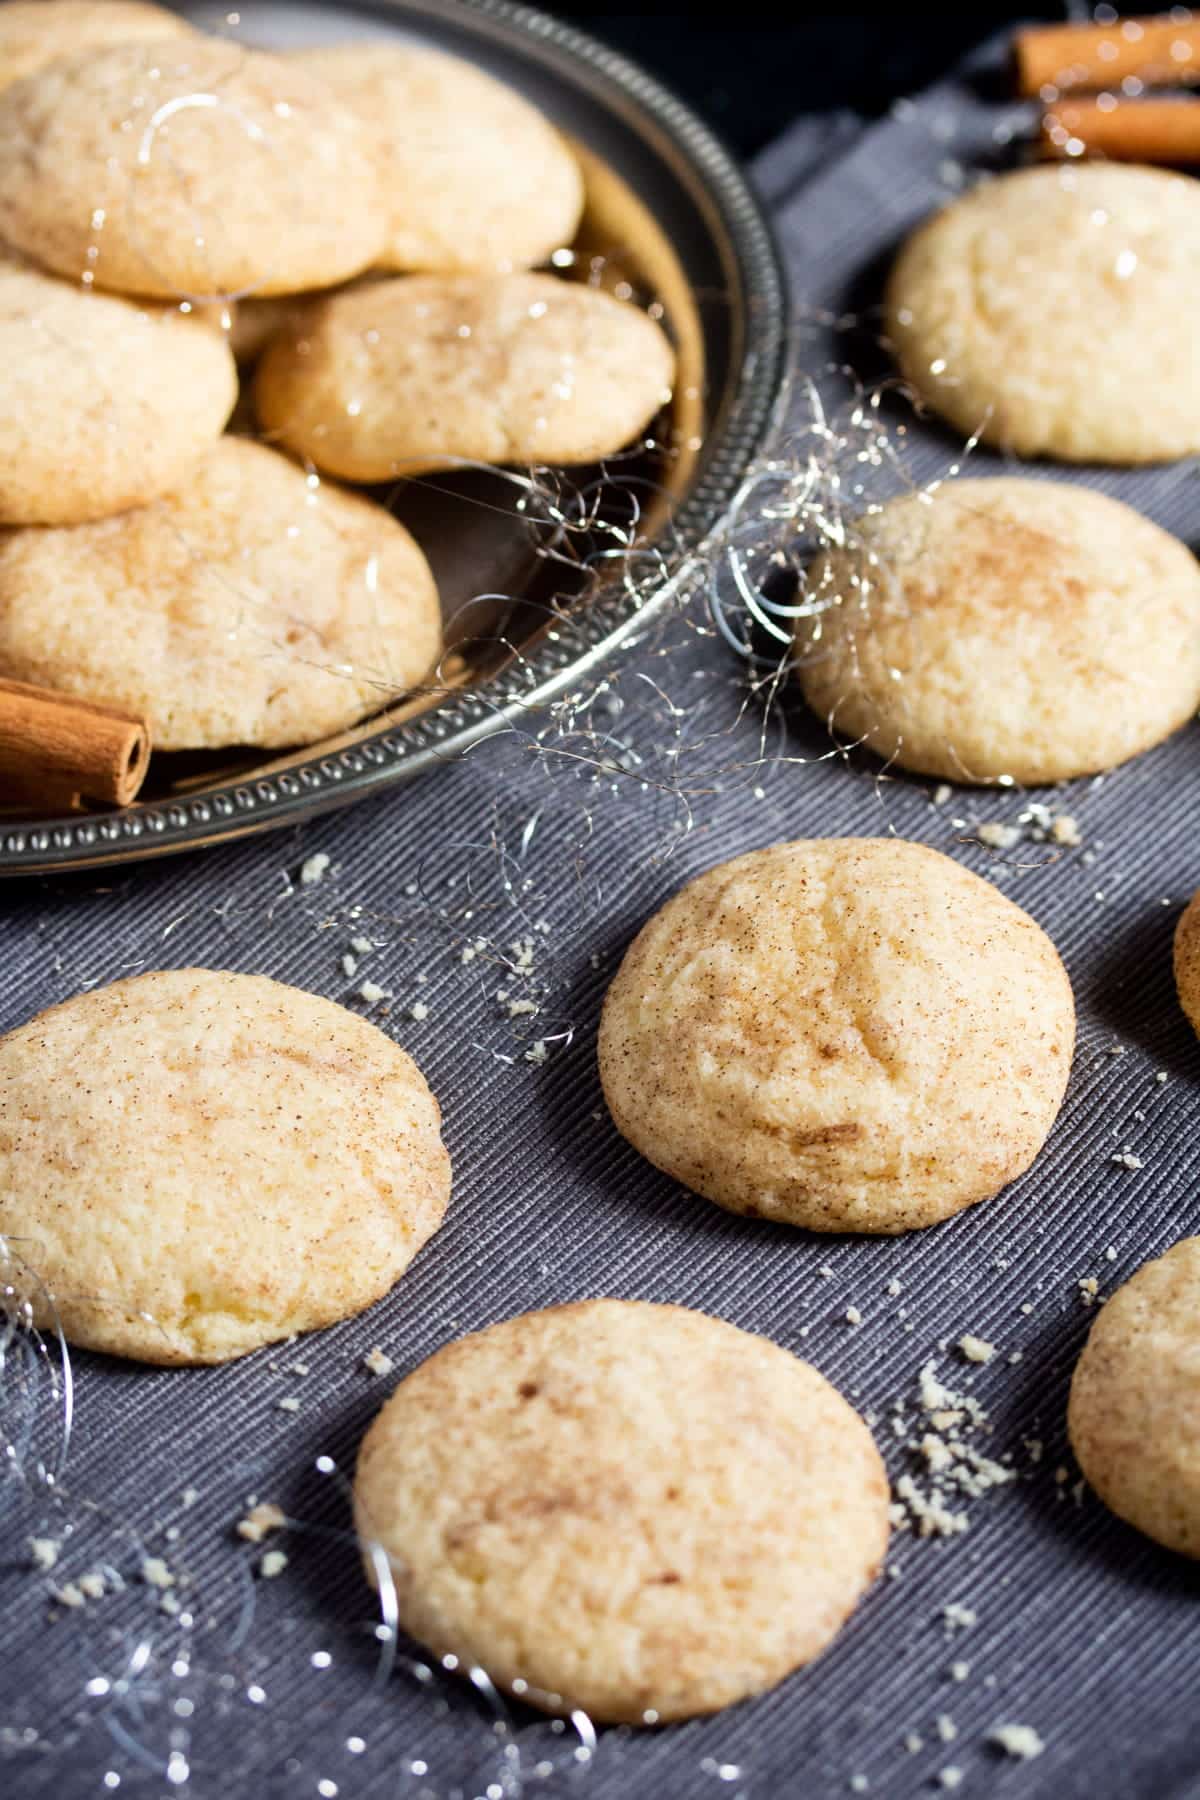 snickerdoodles on a silver platter and on a black cloth.